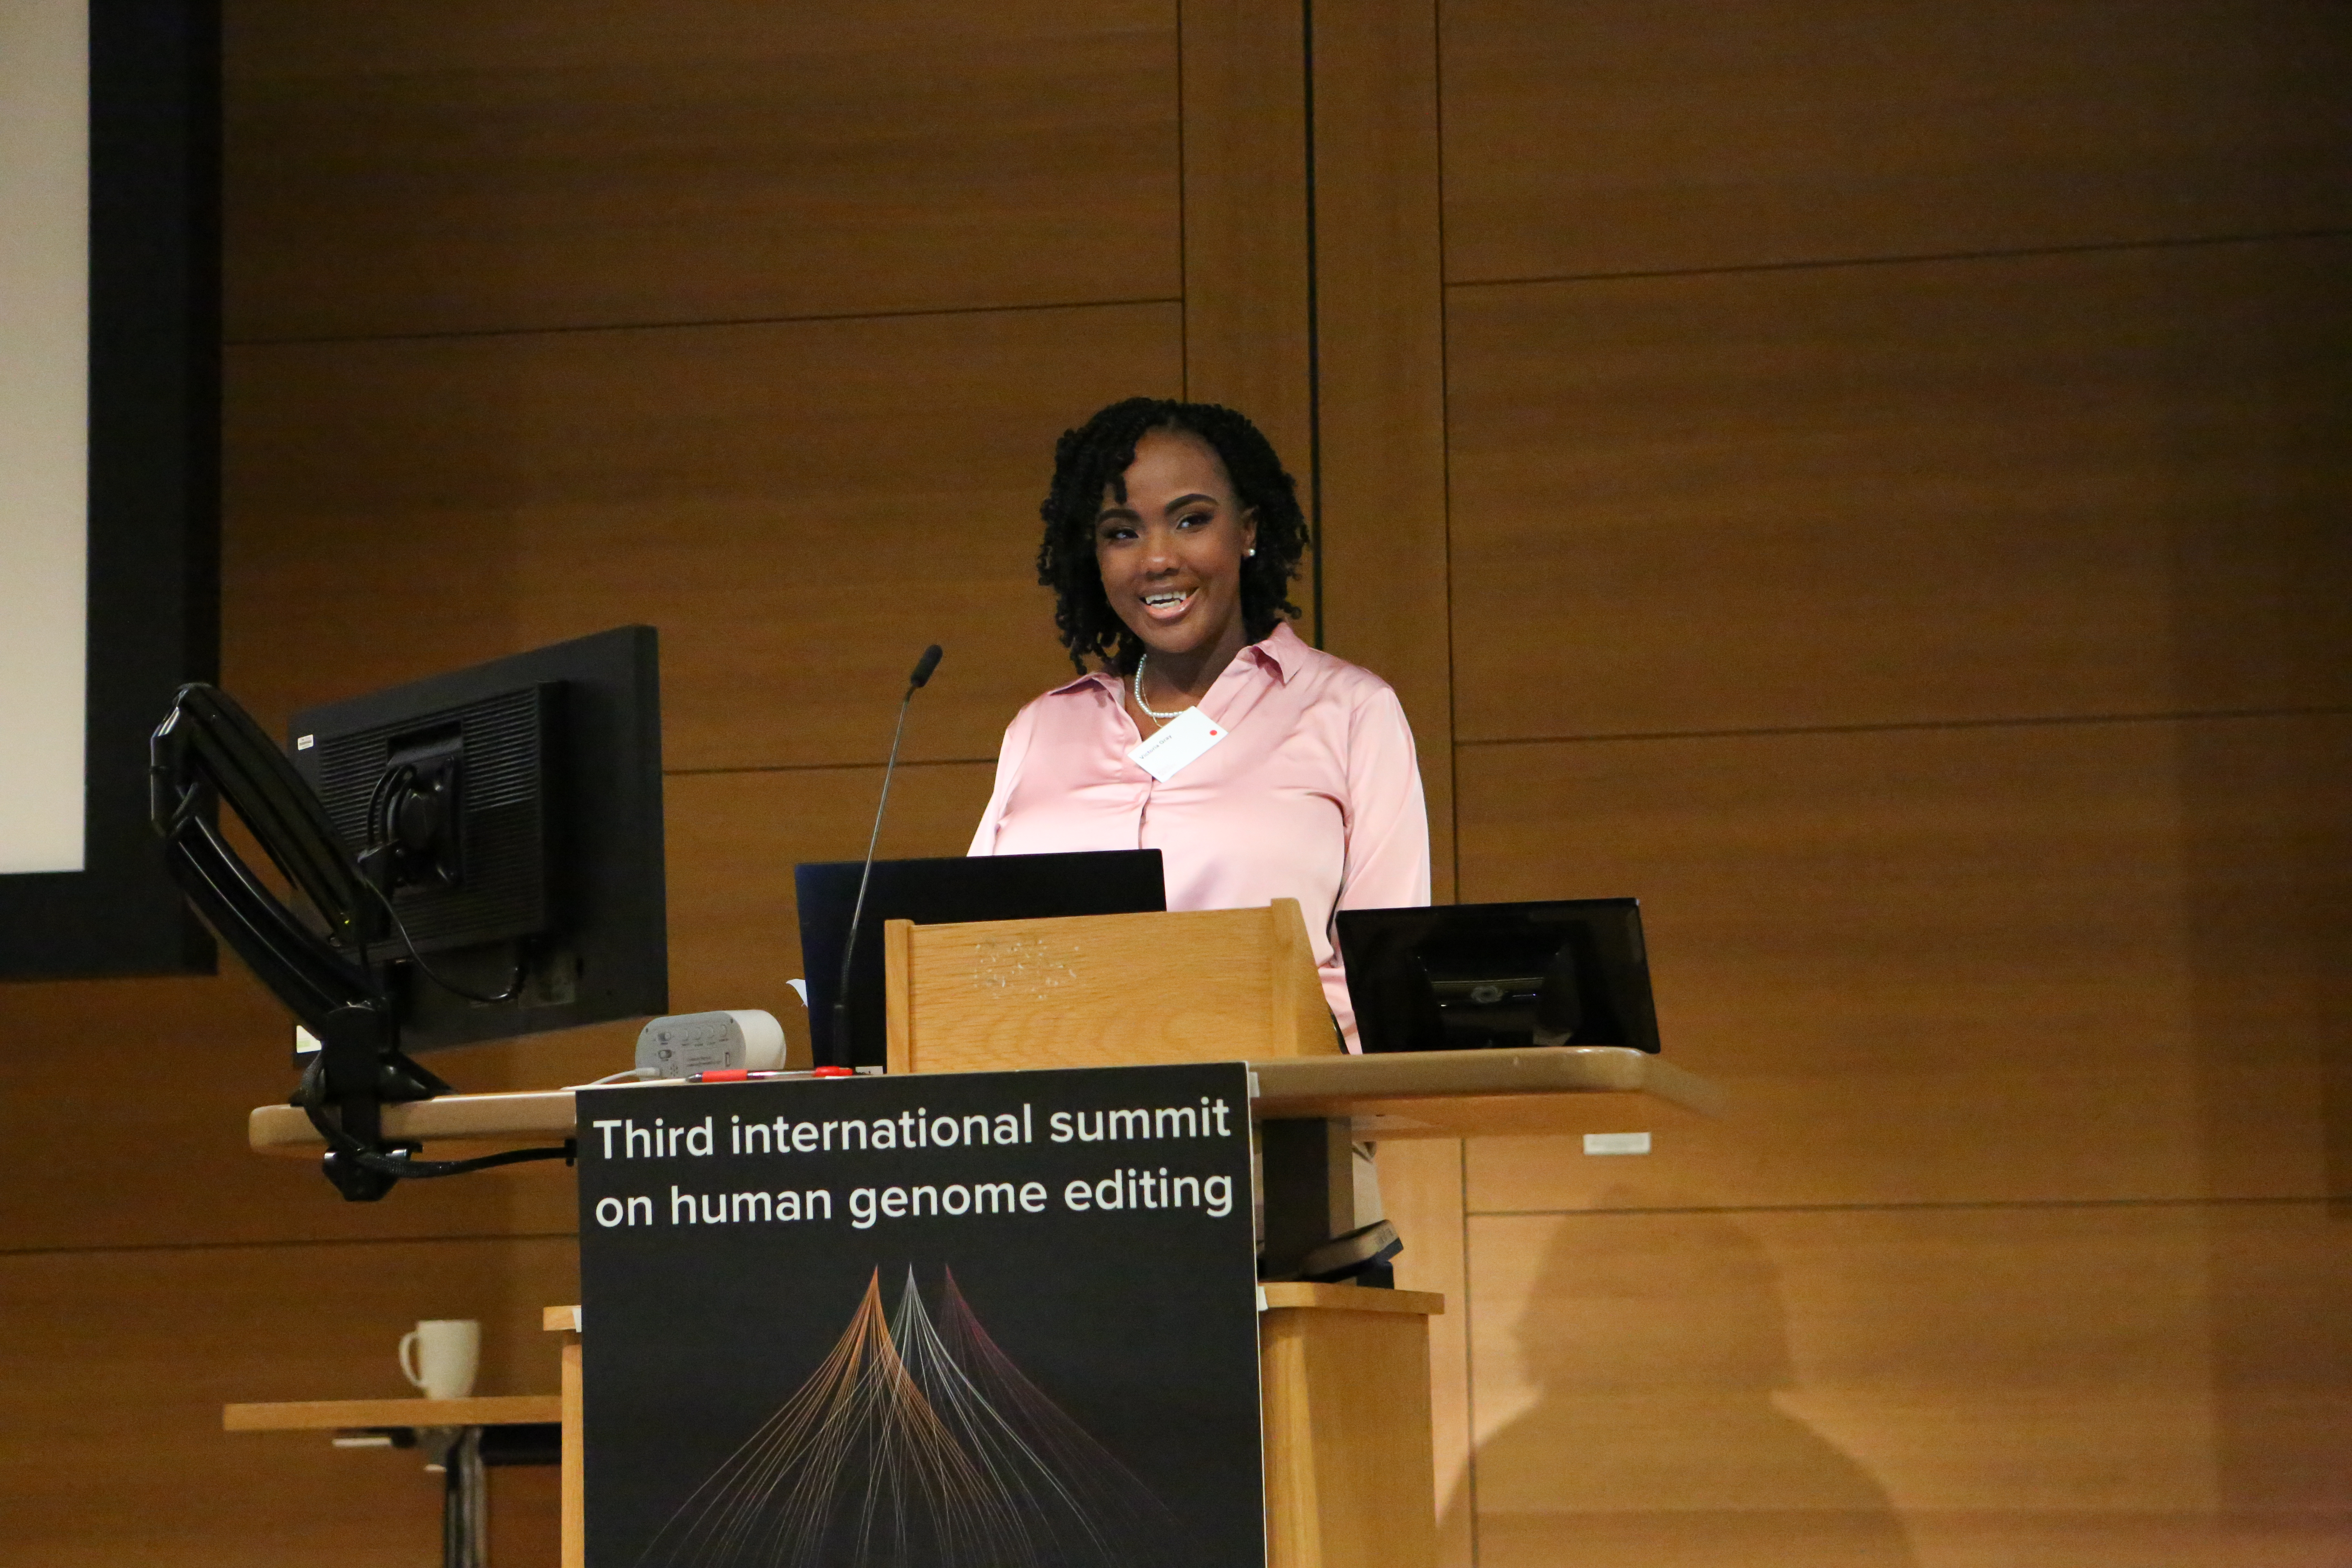 Victoria Gray at the human genome editing summit in London this week